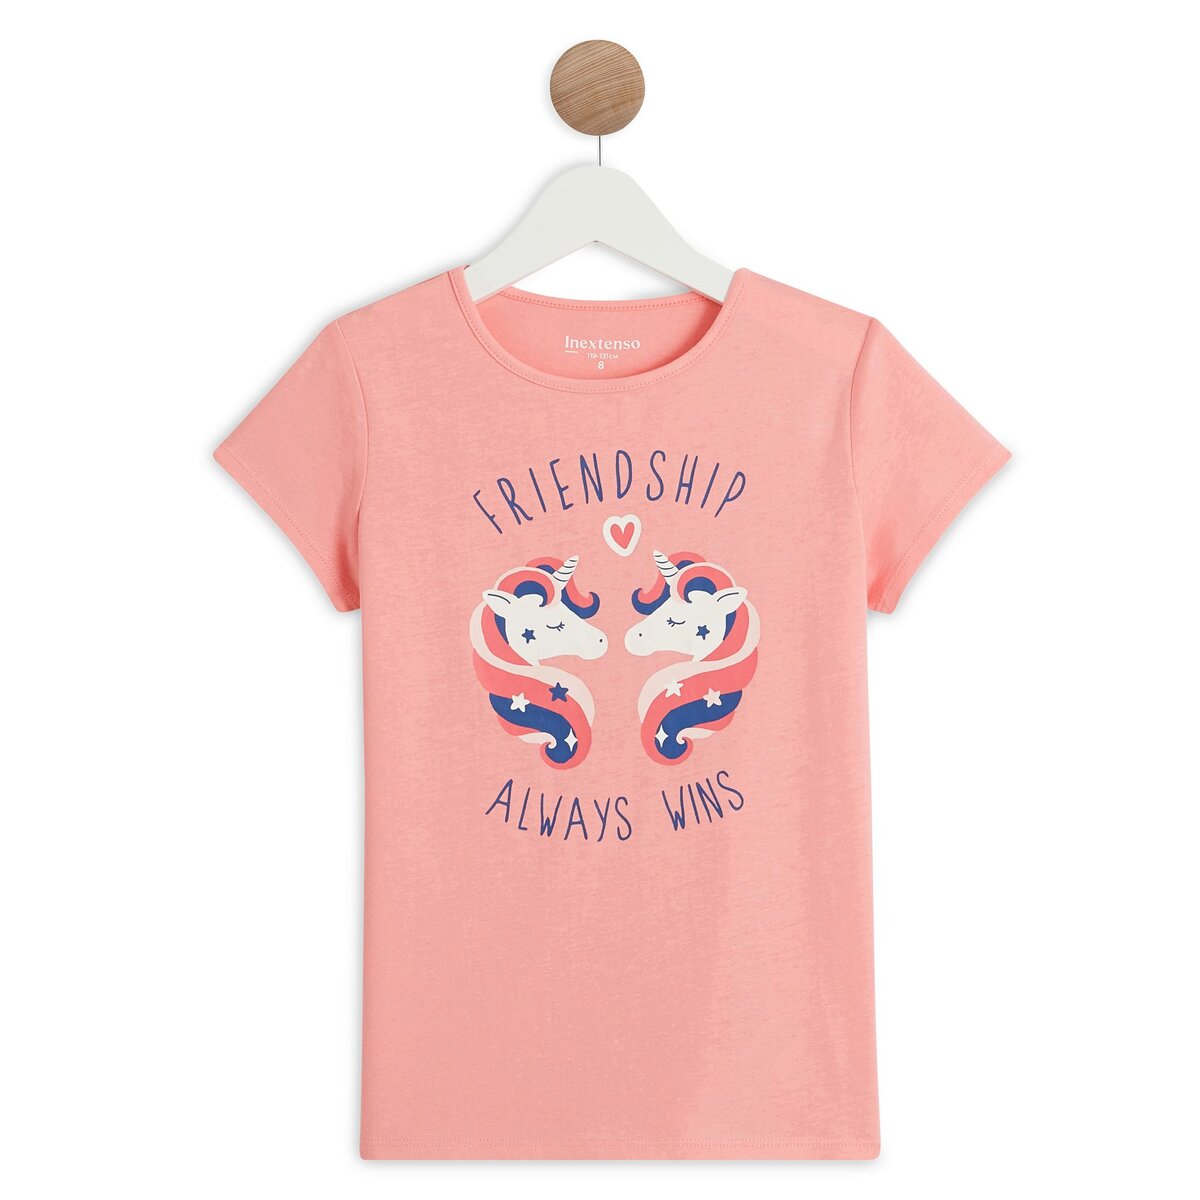 INEXTENSO T-shirt manches courtes licorne fille